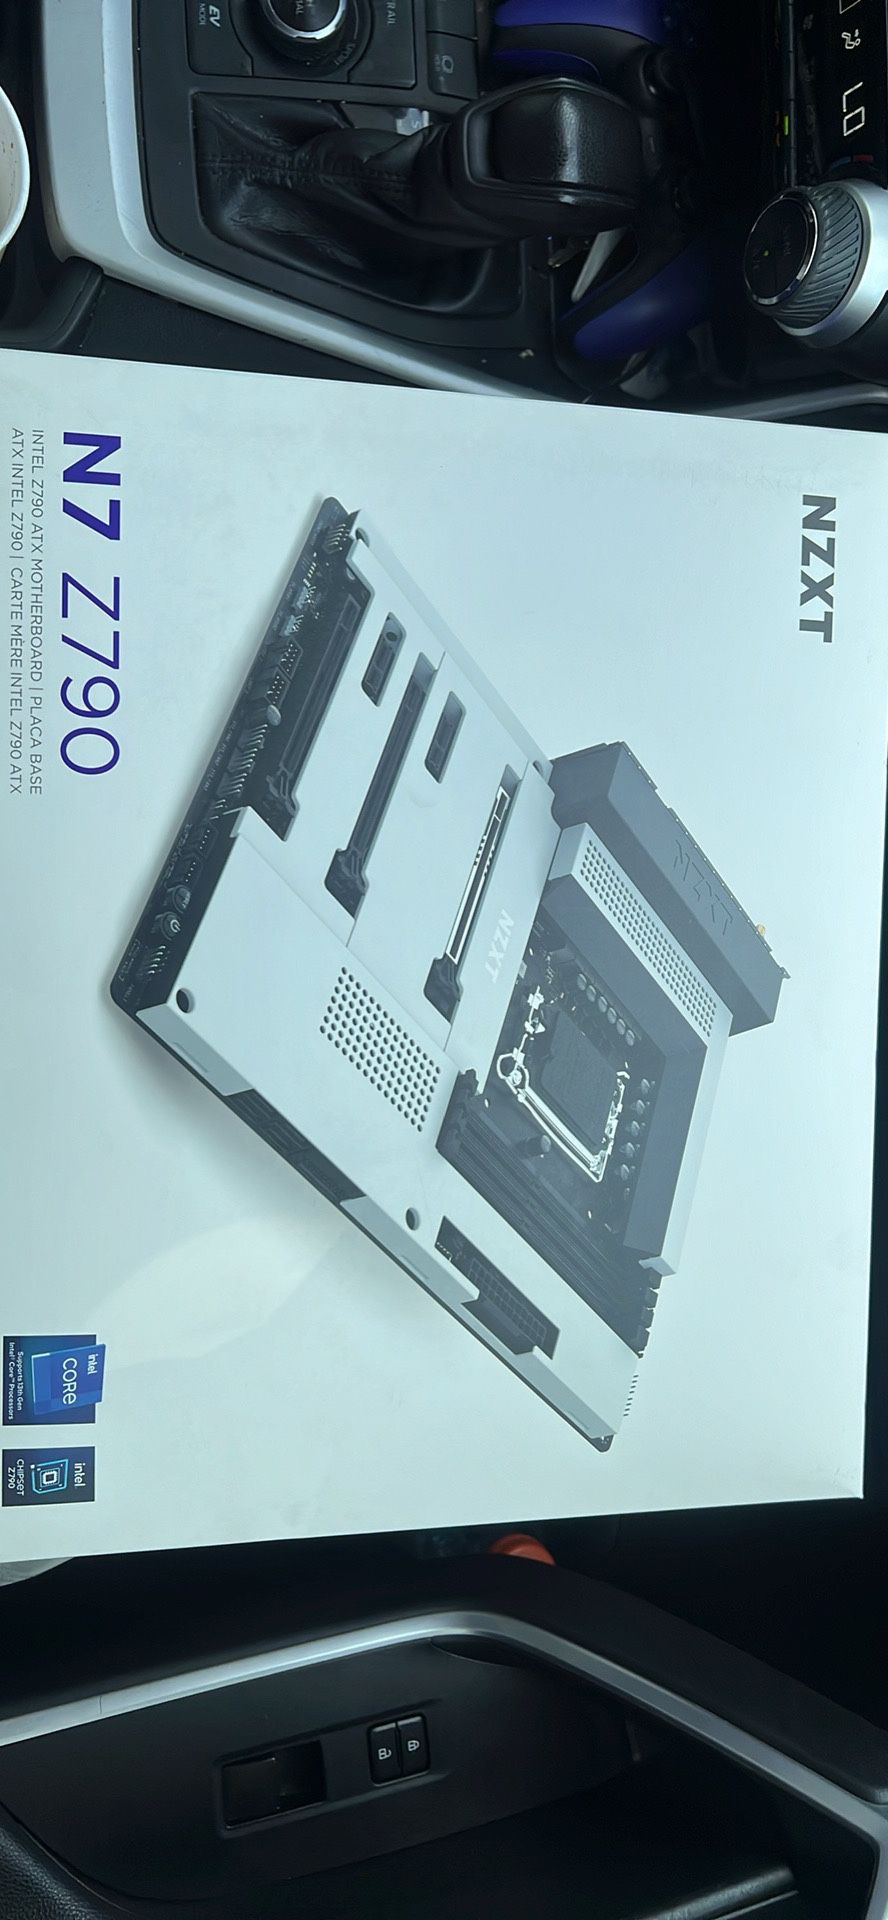 Brand New NZXT Z790 Motherboard 